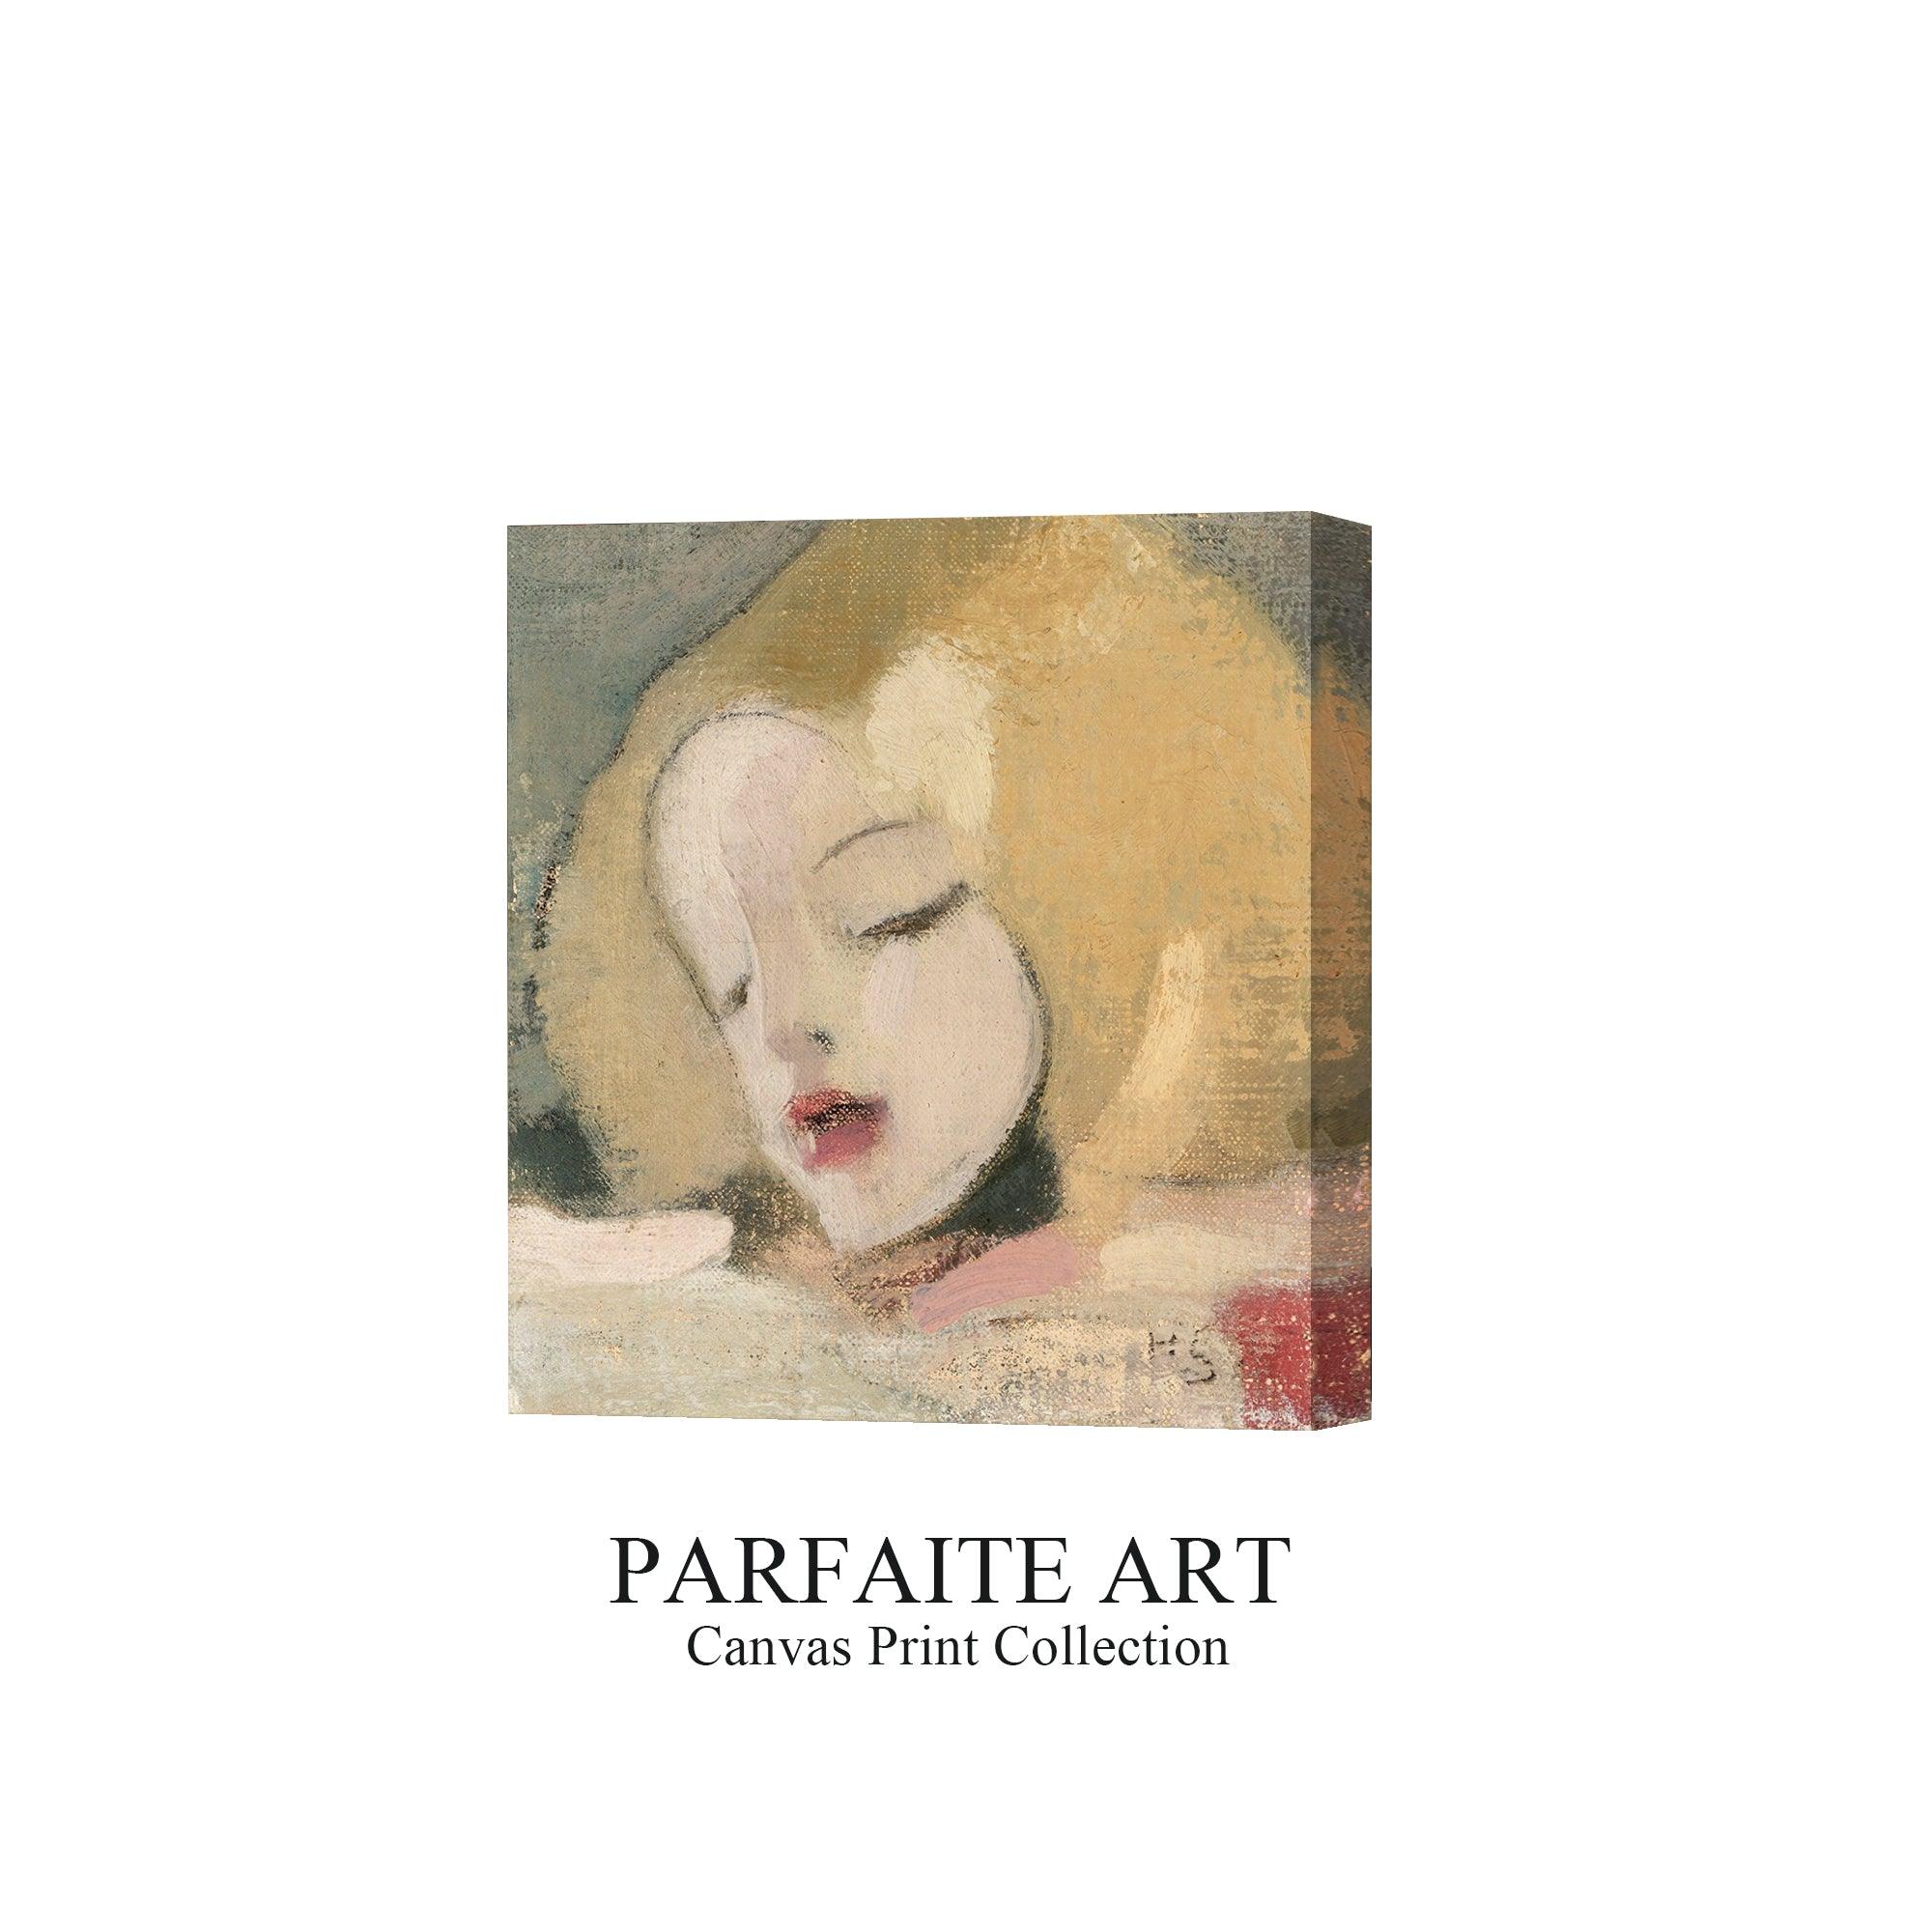 Classic Vintage Wall Art Prints: Giclée Quality, World-Renowned Paintings & Art Deco Prints, Expressionism Oil Painting - Available on Printable Canvas #88 No Frame